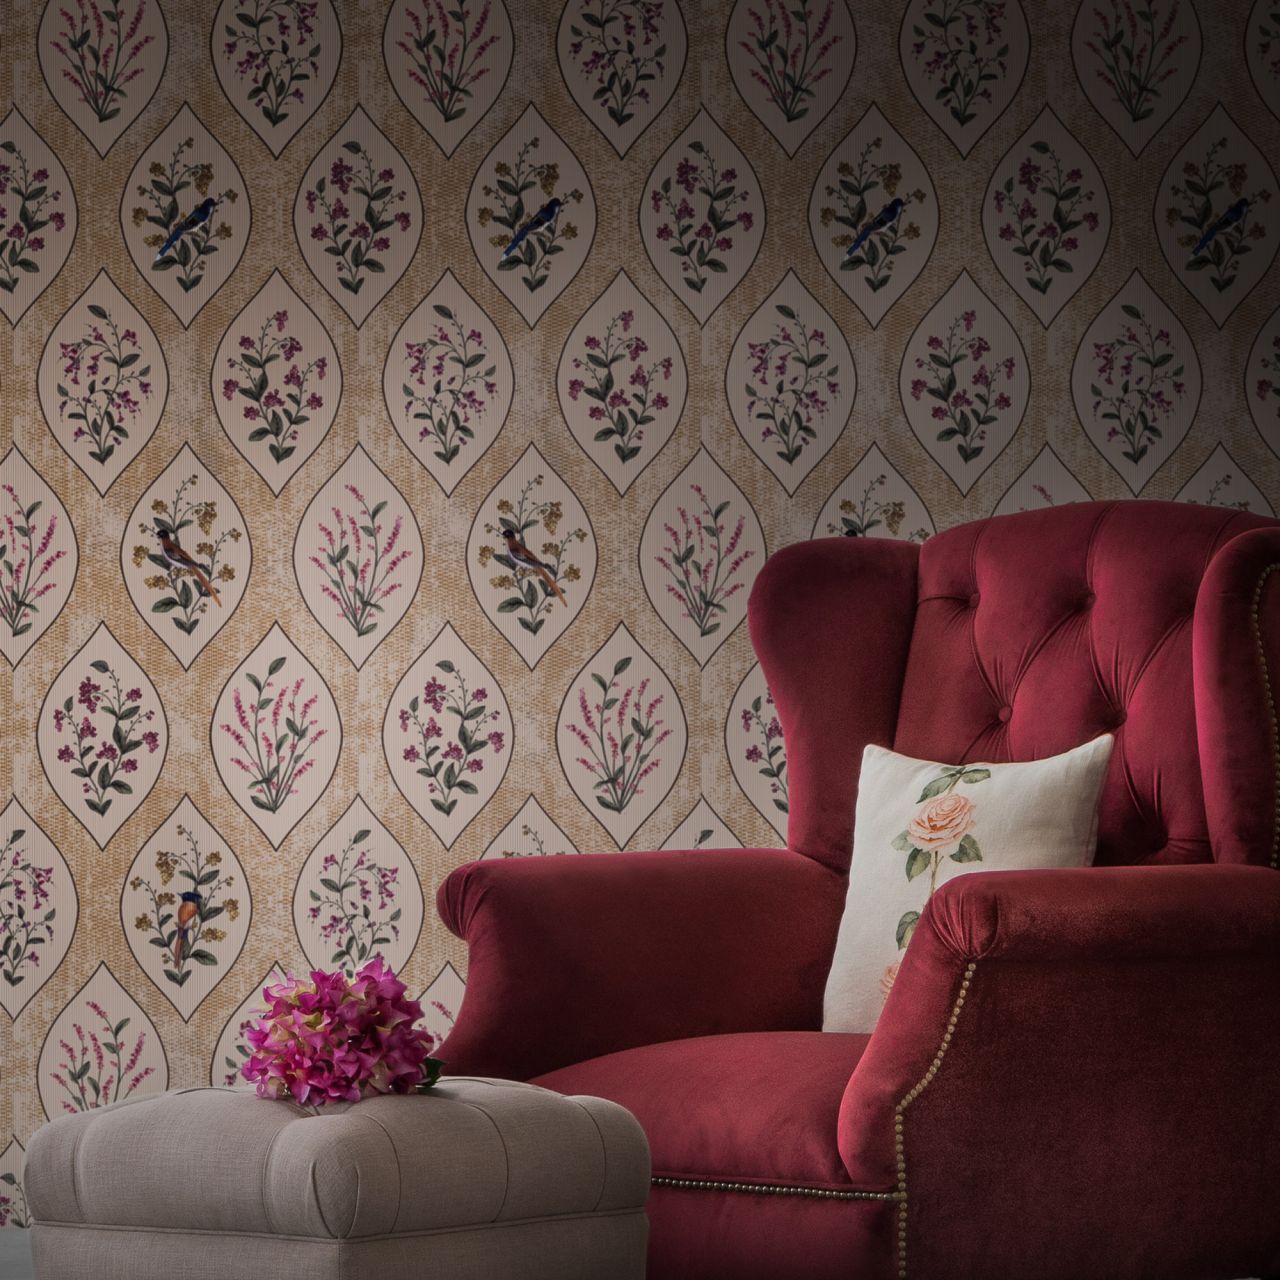 The much awaited 'Wallpaper Collection' has arrived!